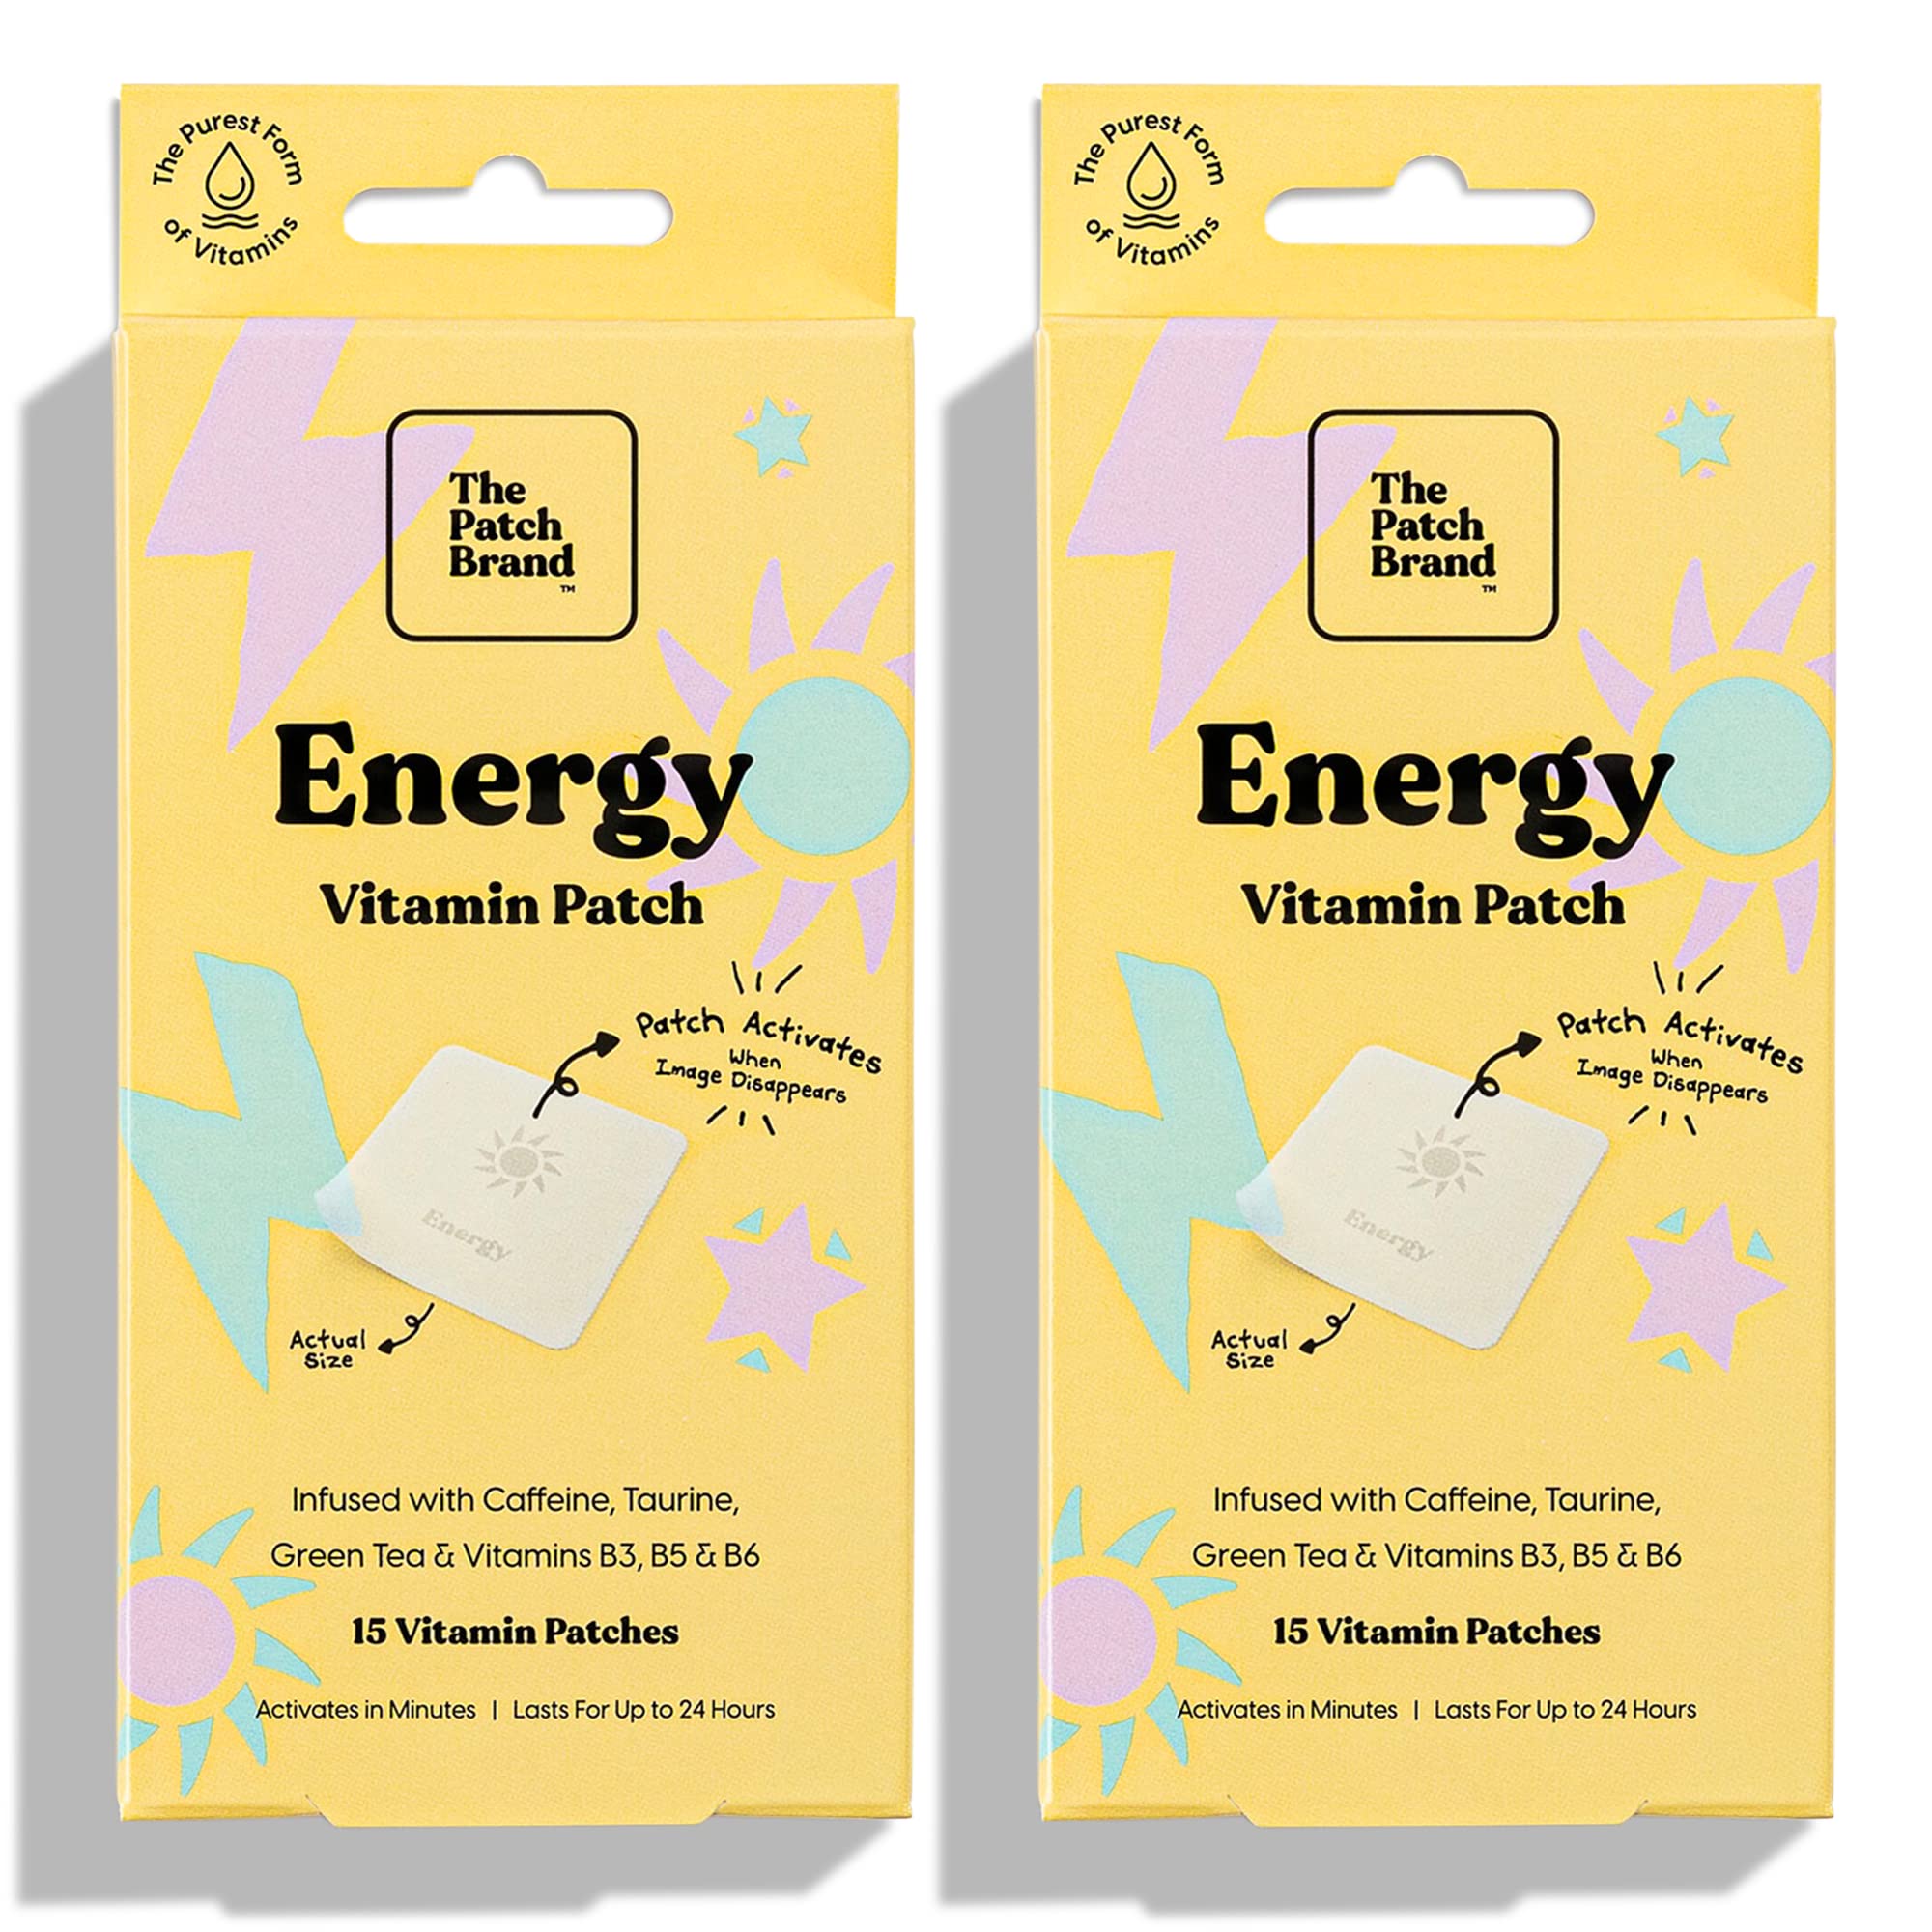  @thepatchbrand: Vitamin Patches